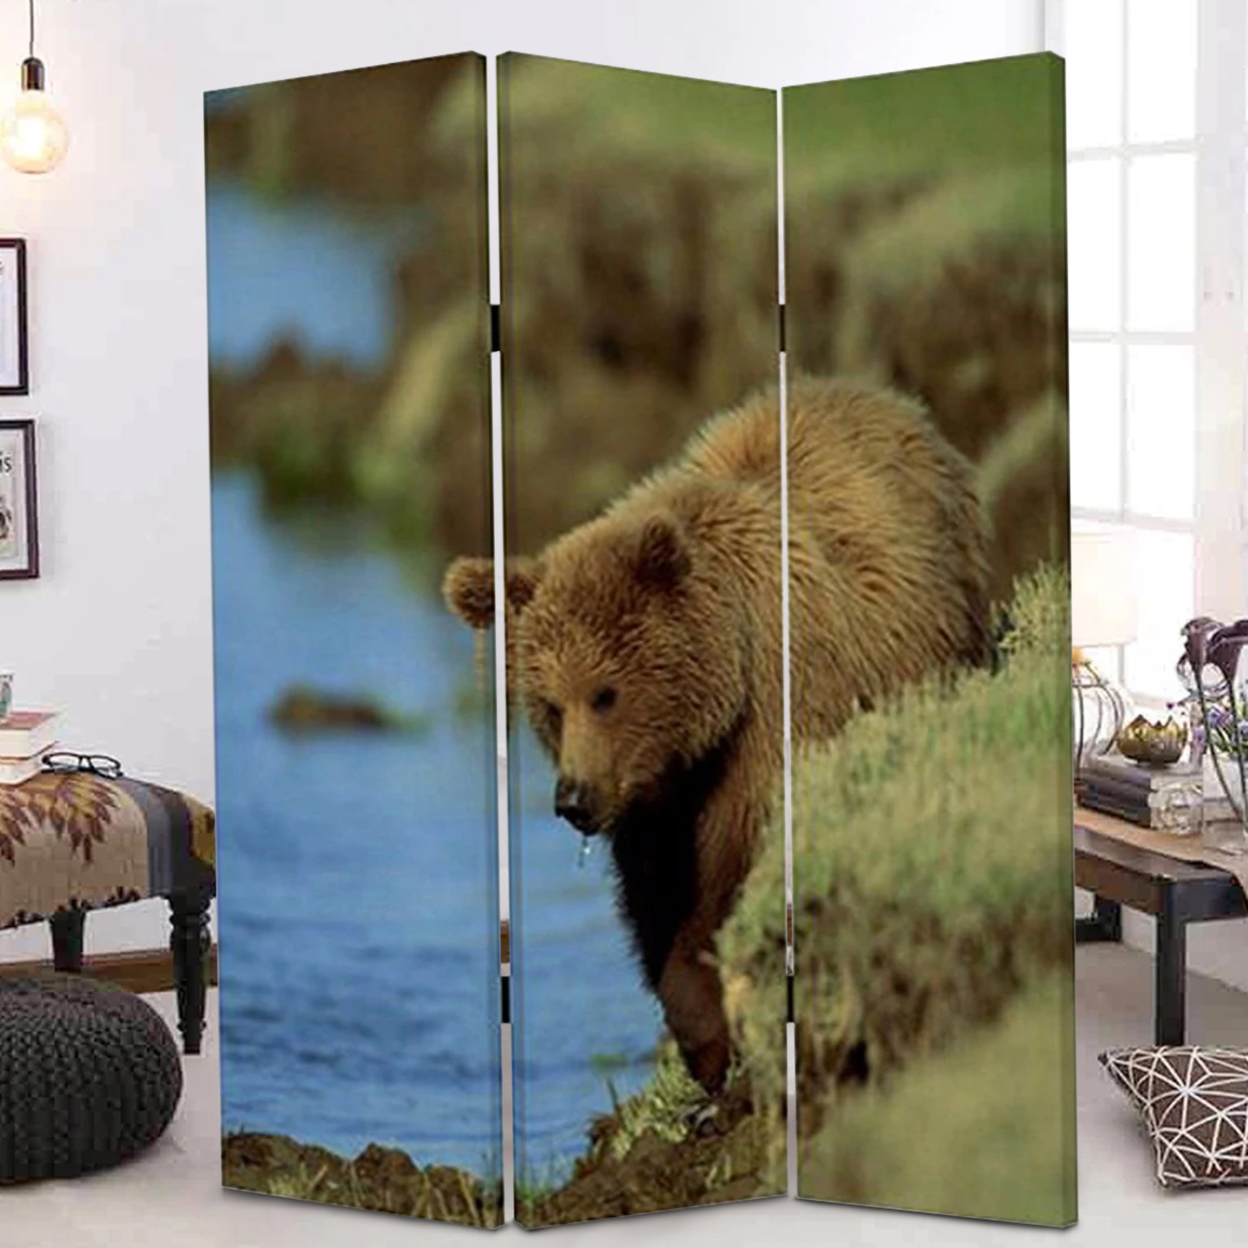 3 Panel Foldable Wooden Screen With Bear Print, Blue And Brown- Saltoro Sherpi